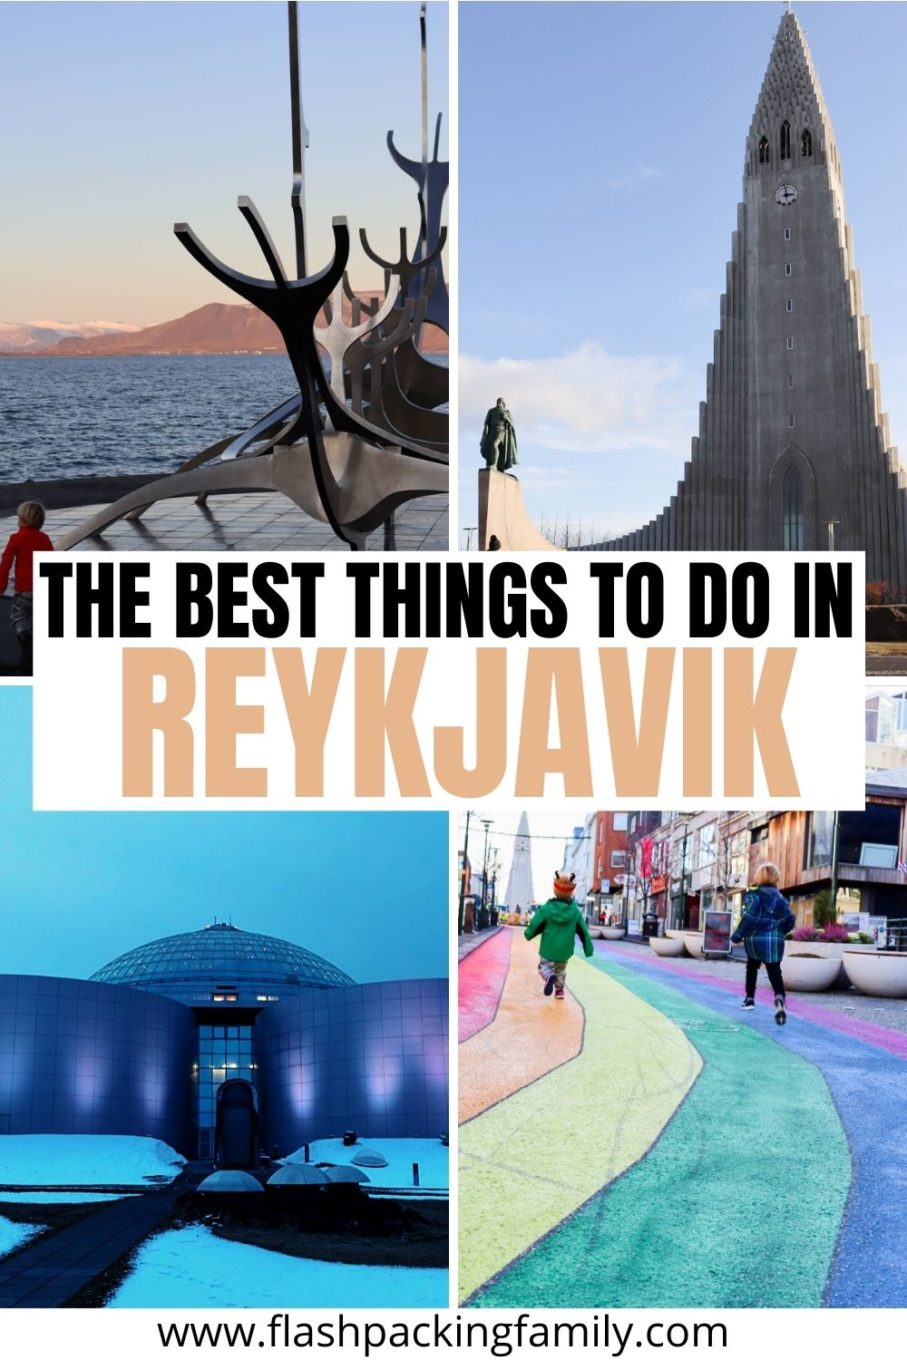 The Best Things To Do In Reykjavik